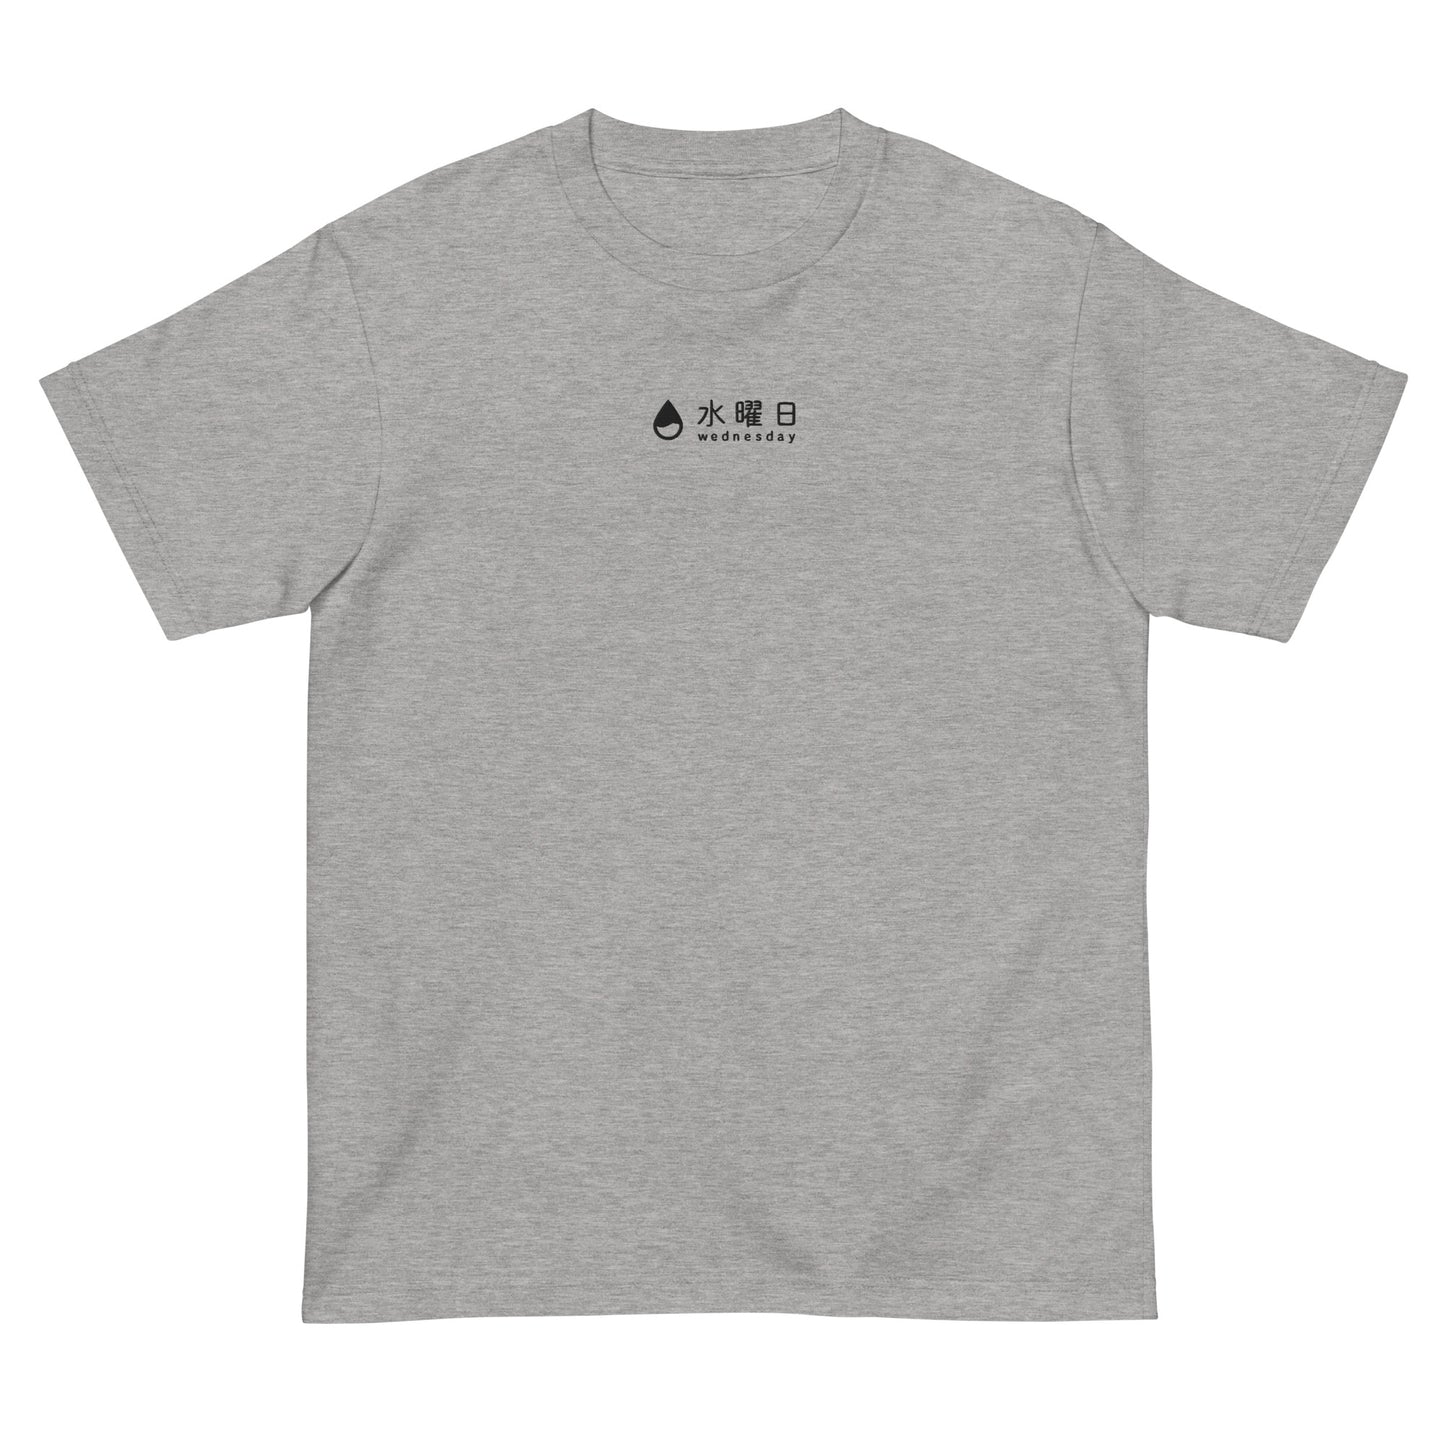 Light Gray High Quality Tee - Front Design with a white Embroidery "Wednesday" in Japanese and English